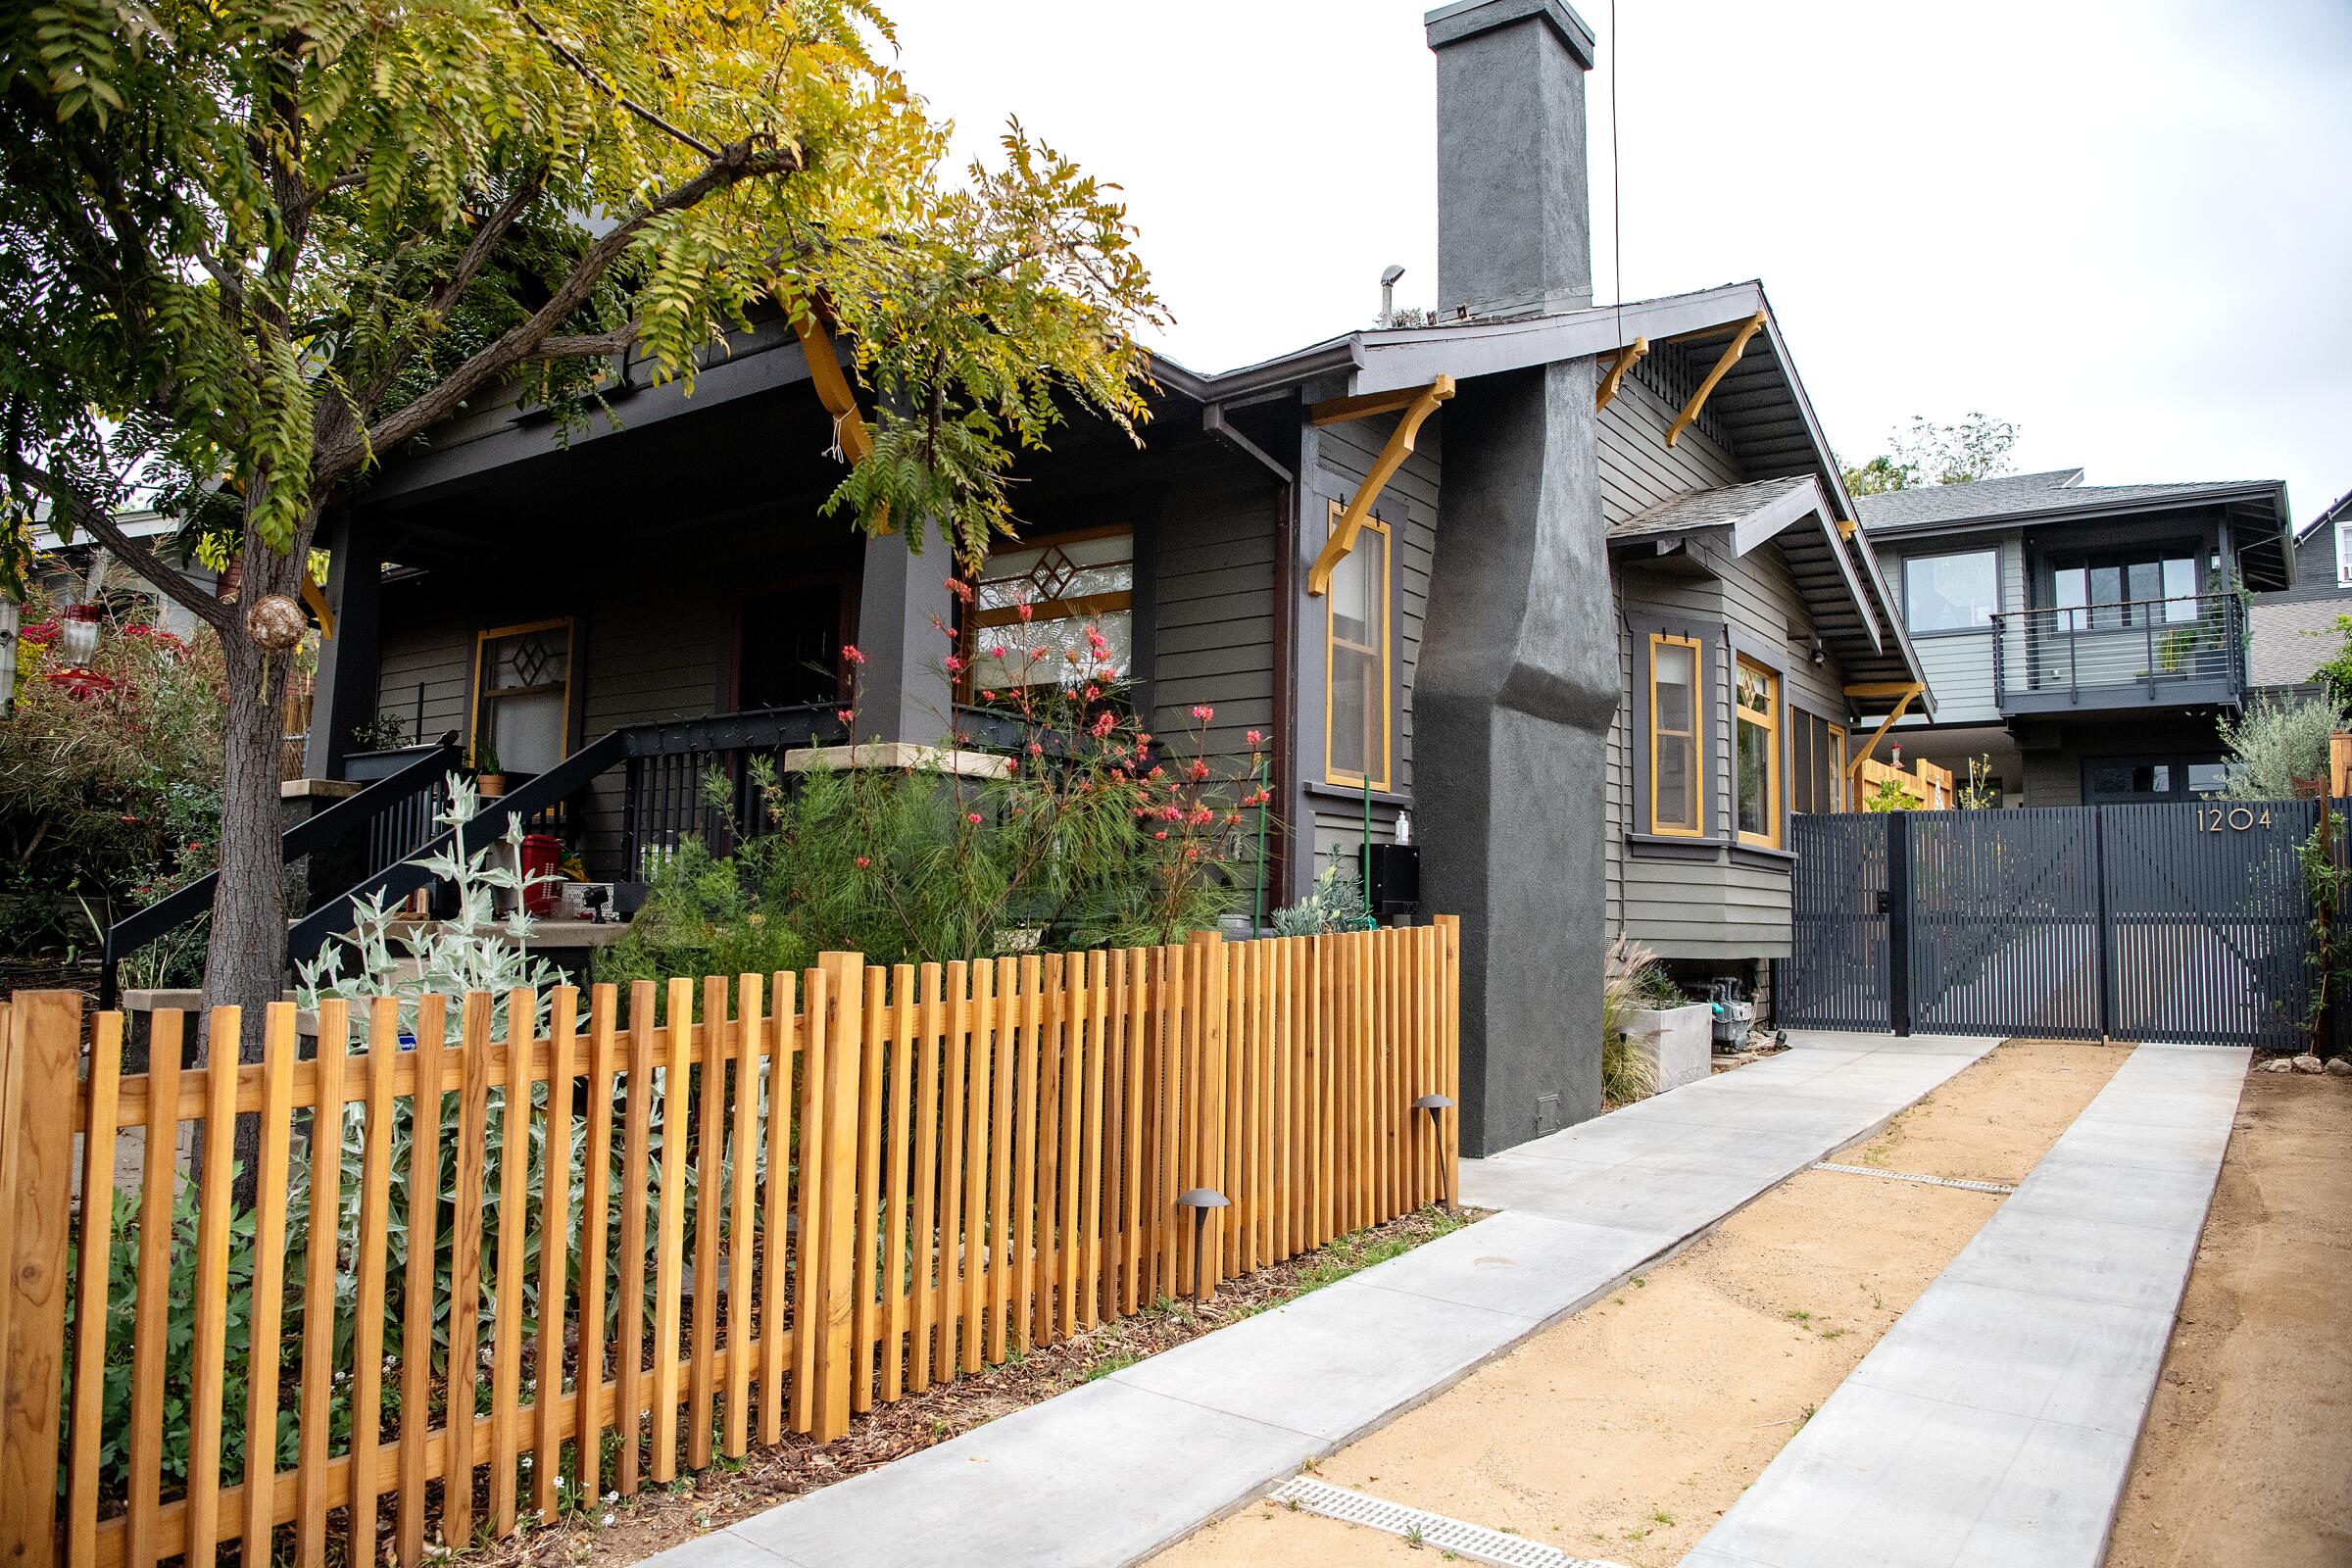 A gray house with yellow trim has a wood picket fence in the front yard and an accessory dwelling unit elevated behind it. 